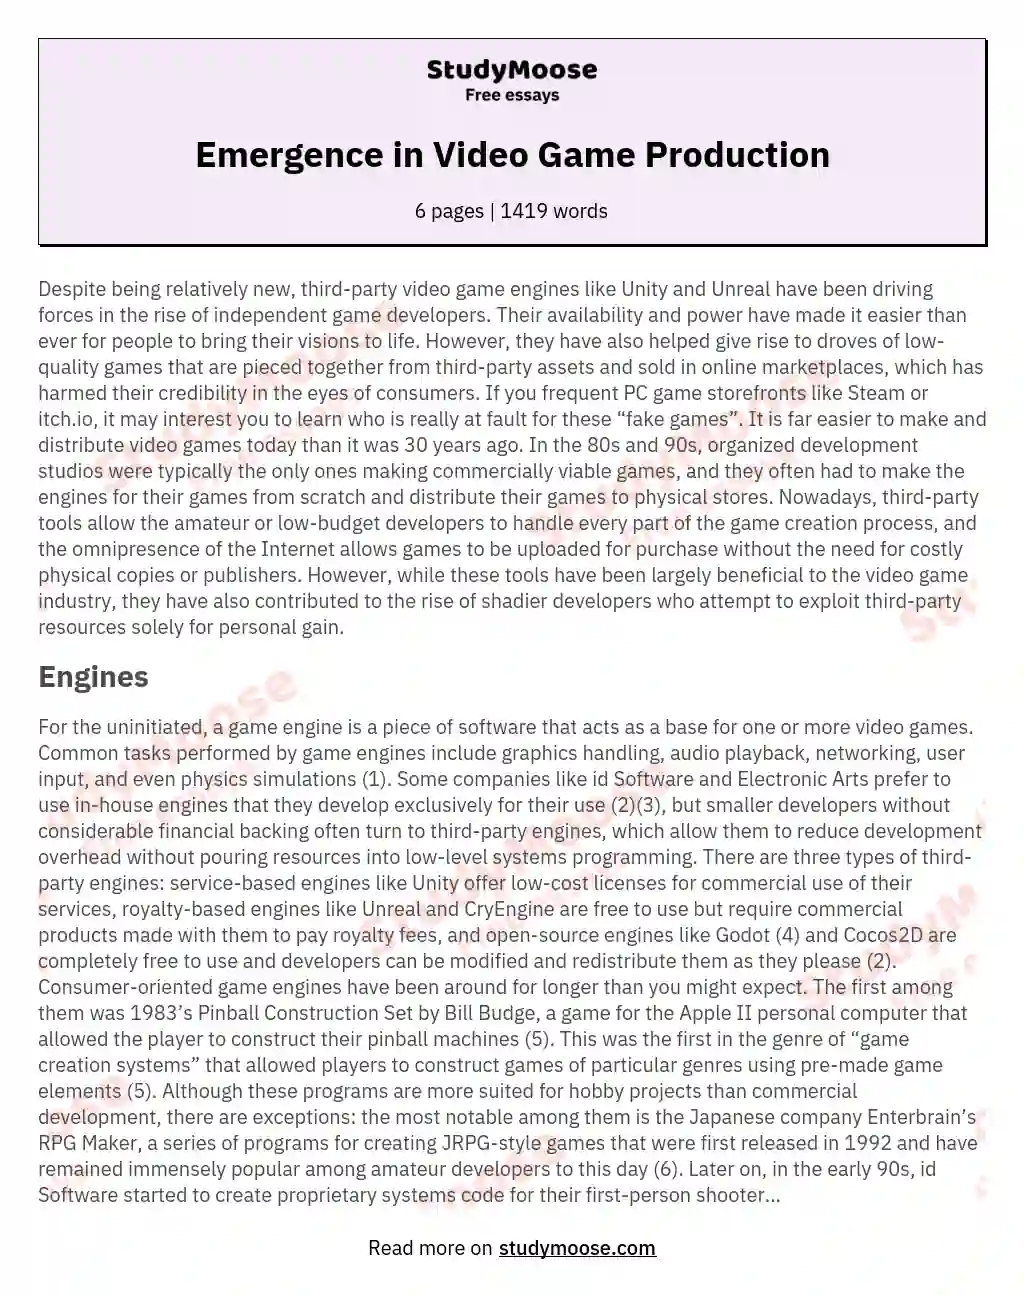 Emergence in Video Game Production essay